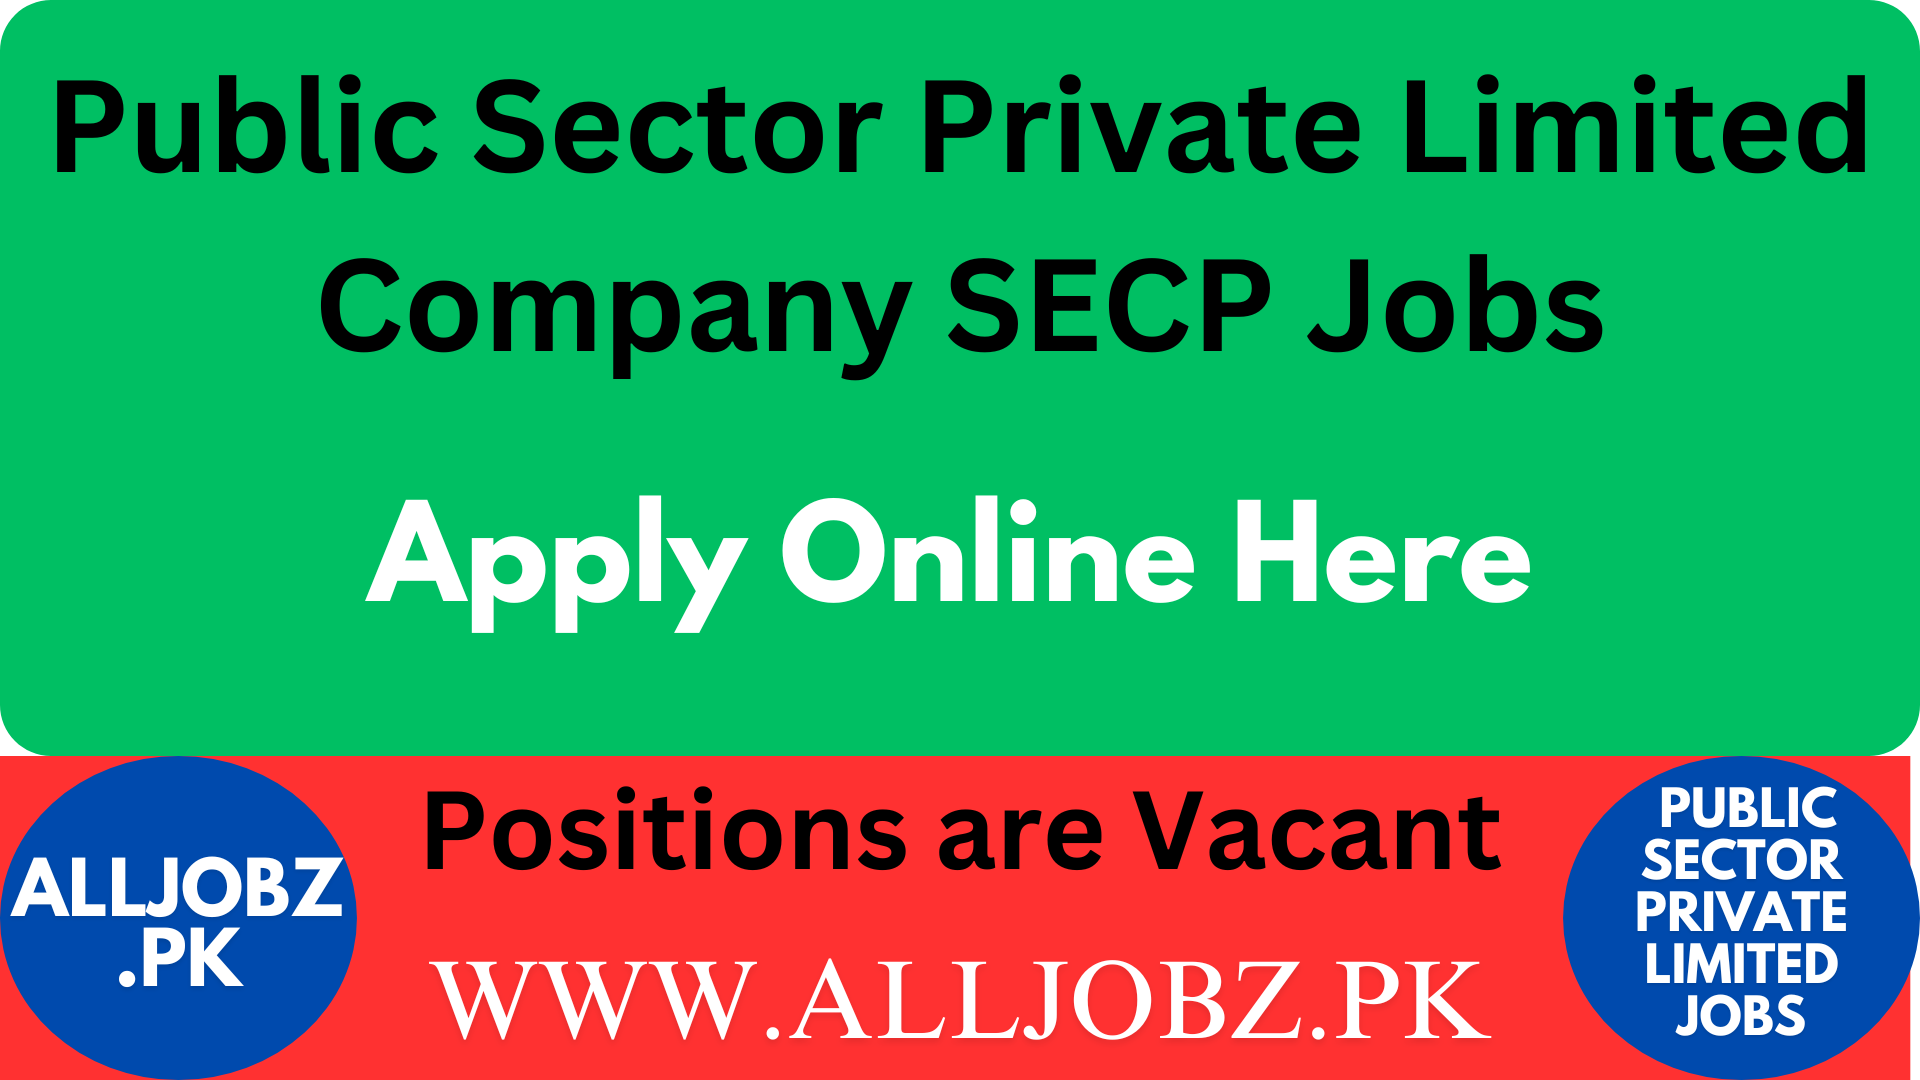 Public Sector Private Limited Company Secp Jobs Apply Online, Senior Technical Specialist, Lab Technician, Noc Resource, Technical Specialist Its &Amp; Bvss, Network Specialist, Data Center Specialist, Field Maintenance Team, Project Manager, Admin Officer, Cc Operator, Electrician, Pakistan Railways Jobs, Thar Coal Connectivity Project, Secp Registered Company, Intelligent Mass Transit Solutions, Job Vacancies, Application Process, Education Requirements, Experience Requirements, Age Limit, Application Deadline, Po Box 795, Islamabad, Public Sector Jobs, Job Announcement.